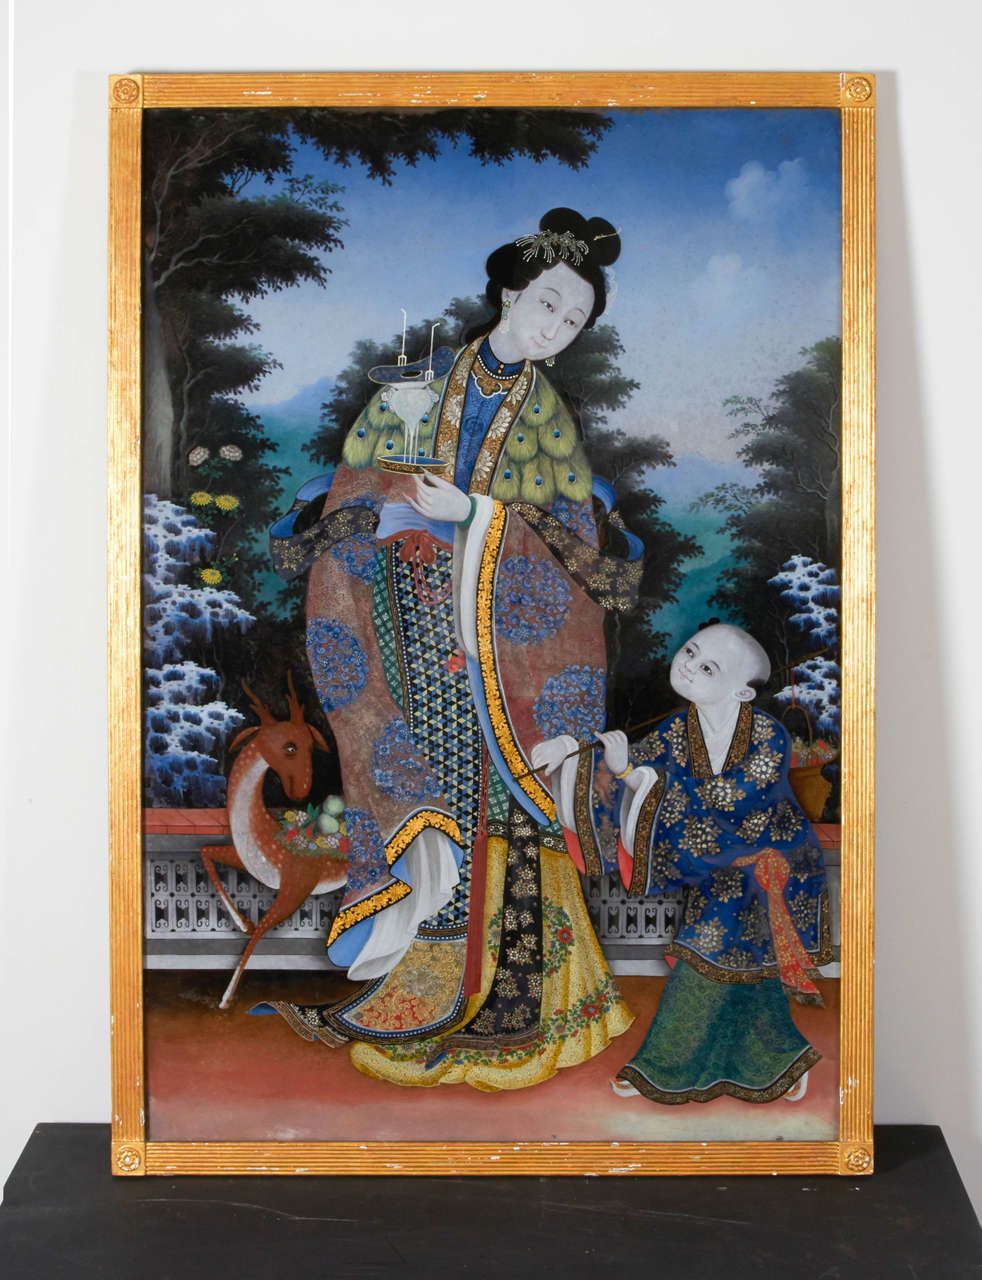 A very large and impressive Chinese reverse glass painting of a Maiden in court dress with an attendant, elaborately painted with fine brocade pattern and peacock feather cloak, holding a censer with a small deer to her left side. Mounted in gold